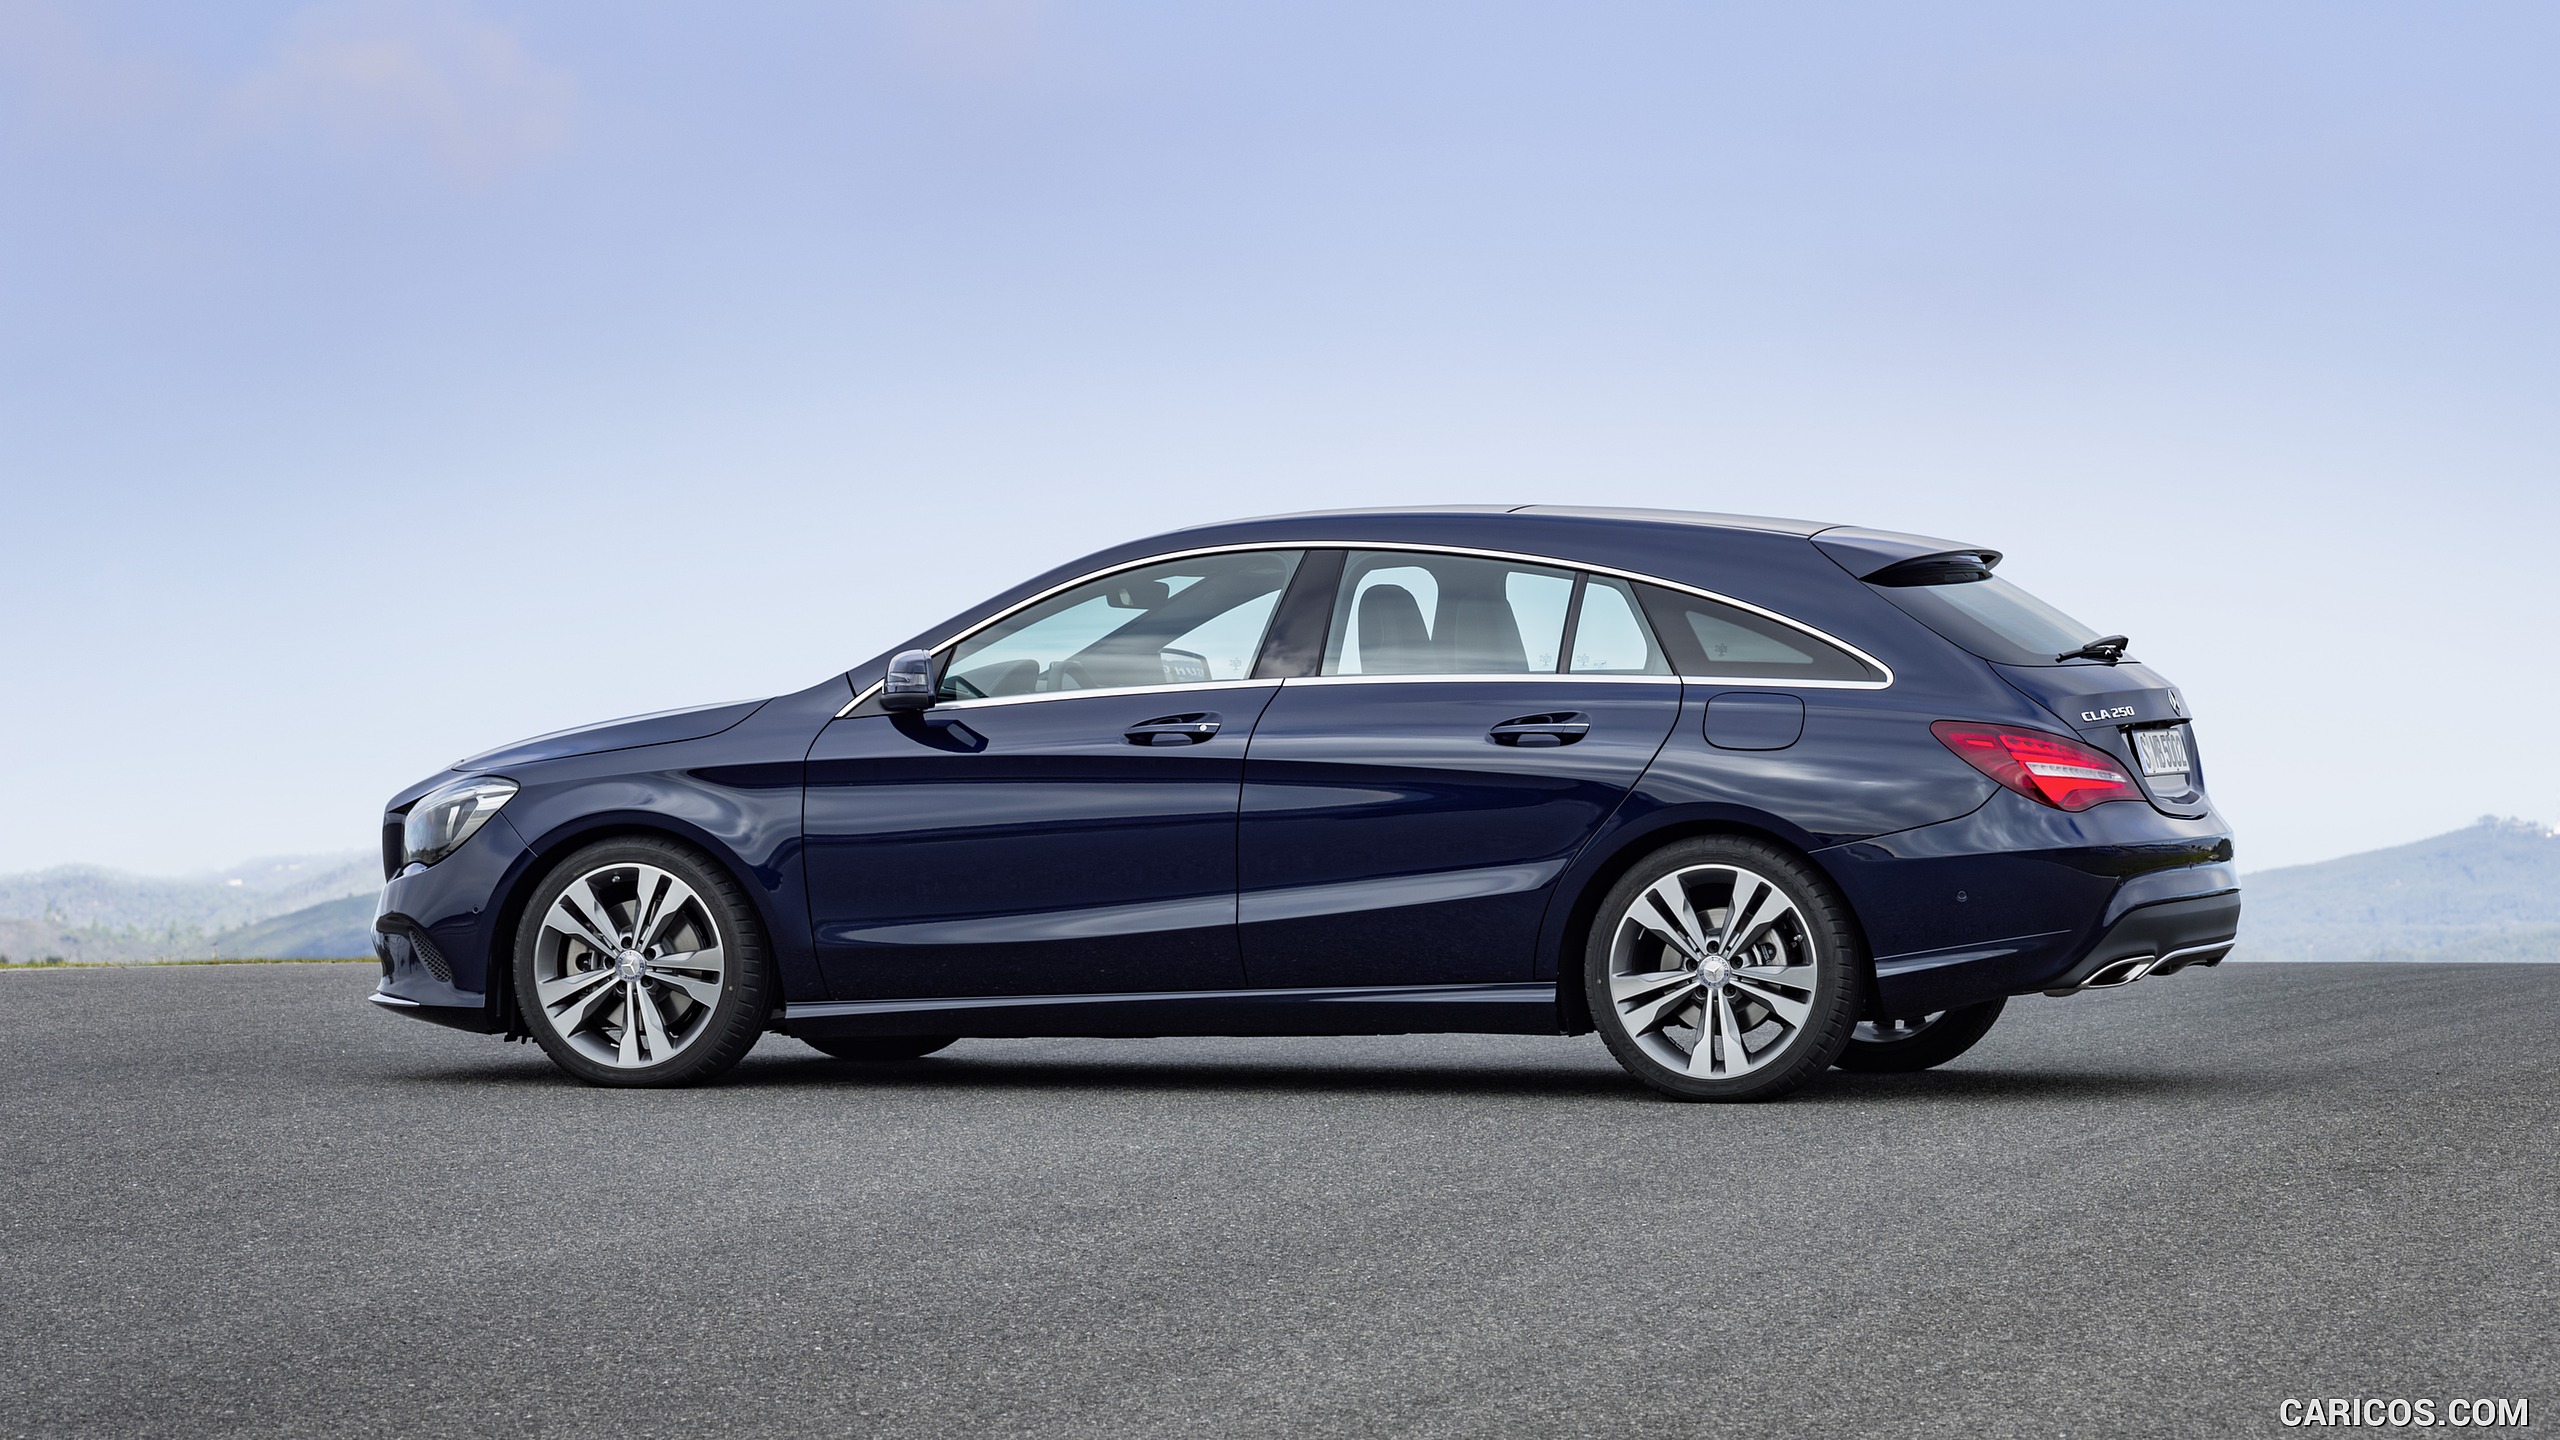 2017 Mercedes-Benz CLA 250 4MATIC Shooting Brake (Chassis: X117, Color: Canvasite blue) - Side, #15 of 19